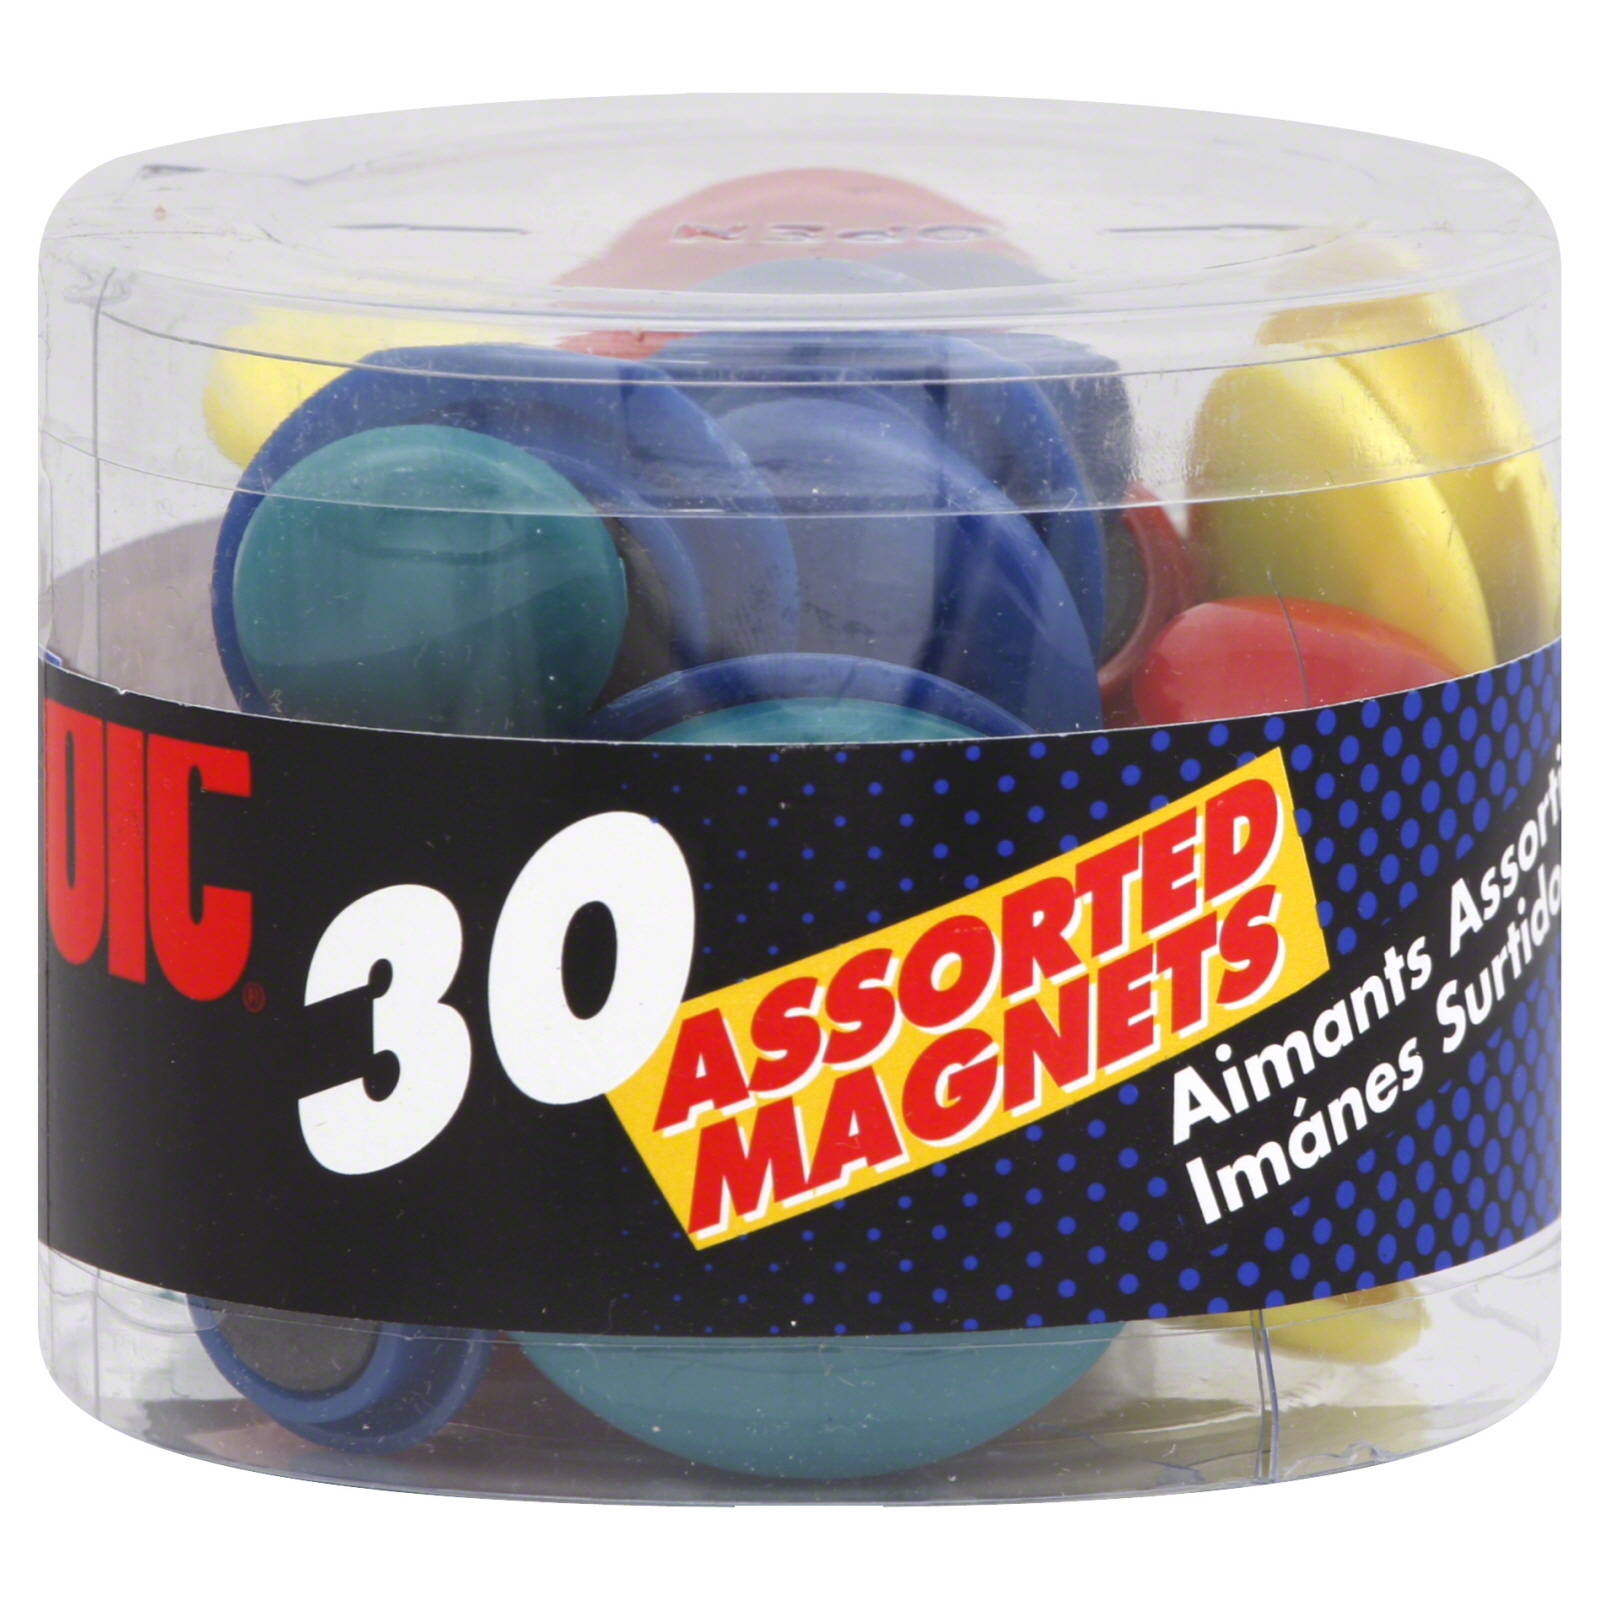 OIC 2138581 Circle Handy 30 Magnet - Assorted Colors: Red, Yellow, White, Blue, Green